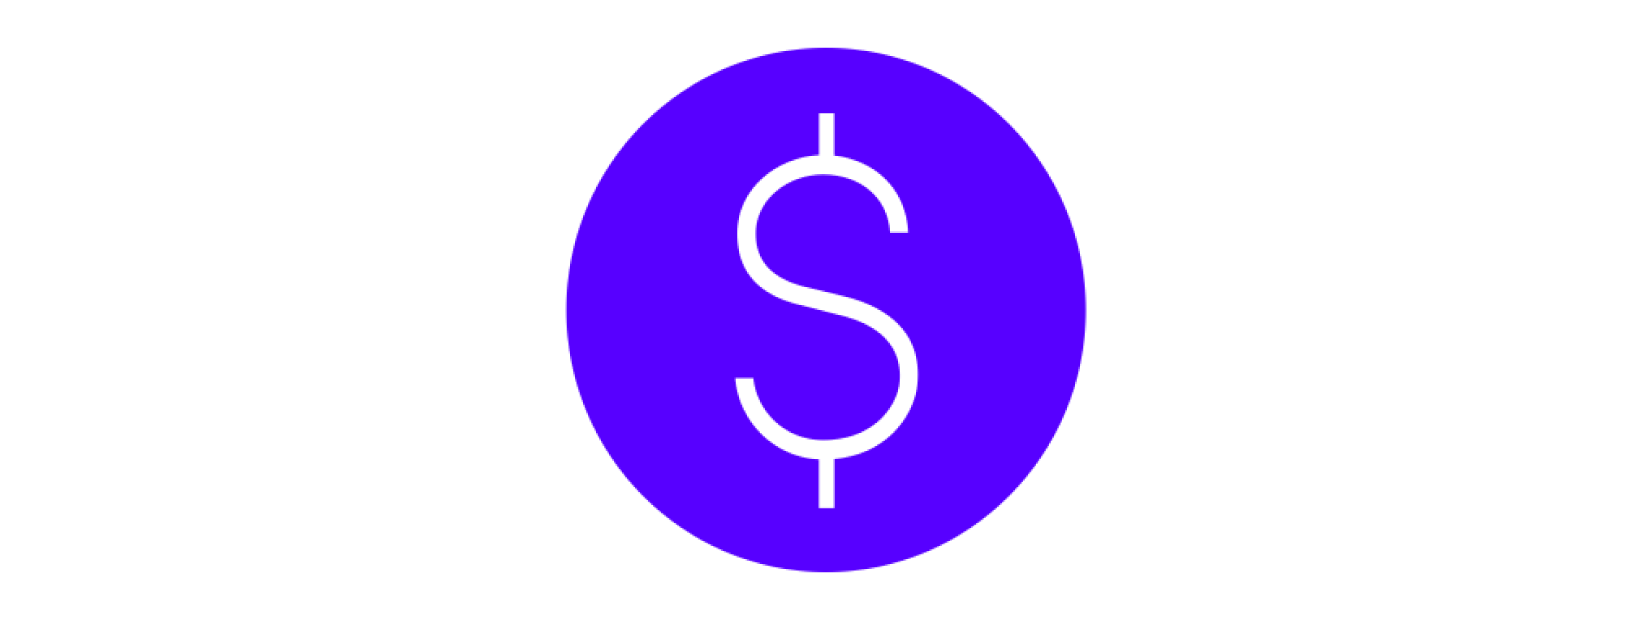 SmileDirectClub 30-Day Money-Back Promise dollar outlined icon on a blurple circle 